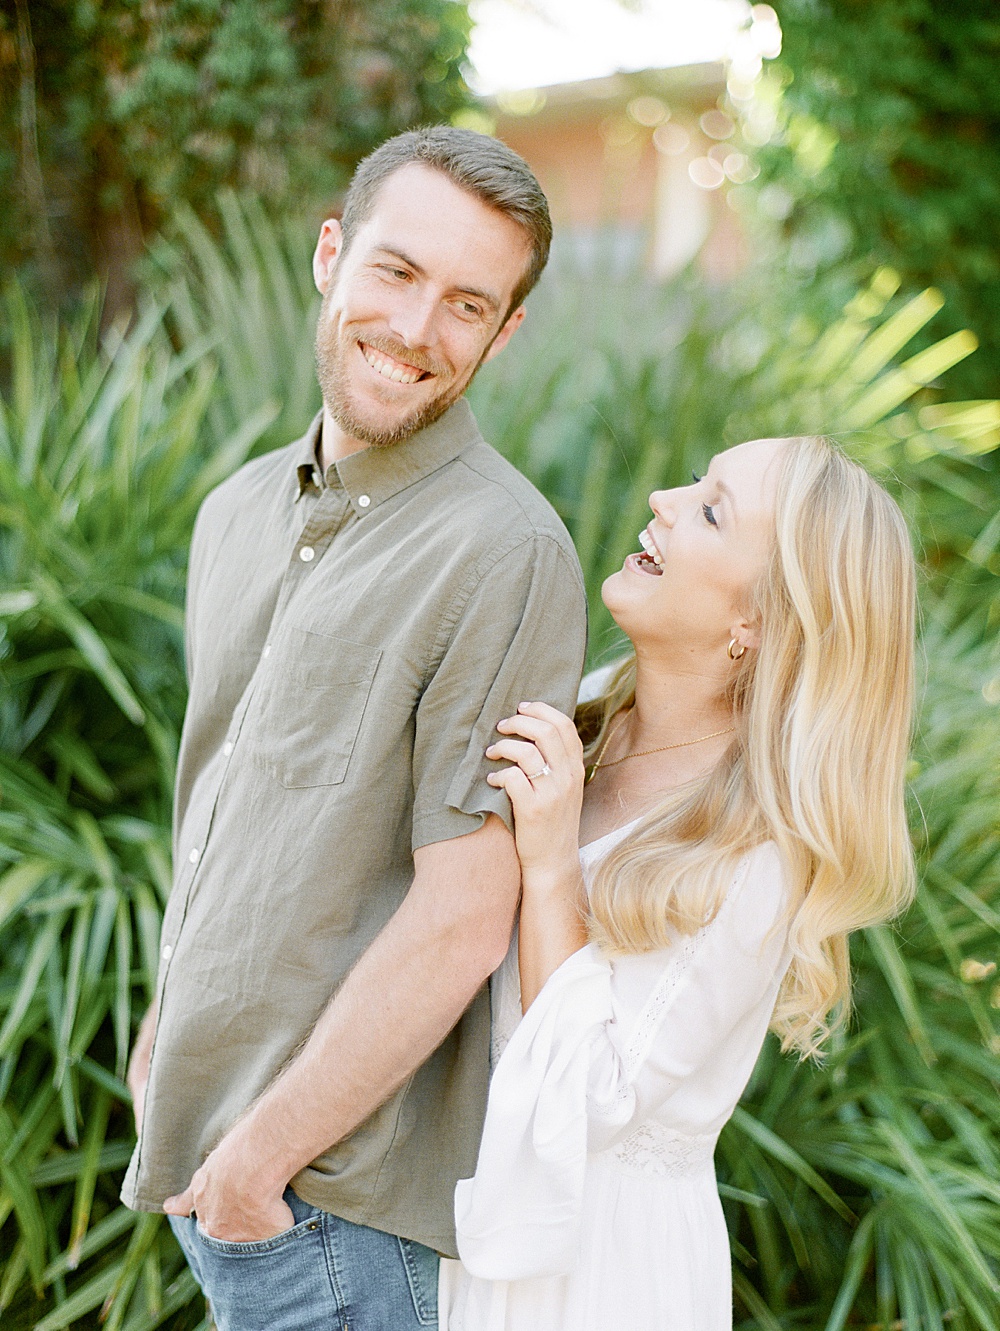 Guy and girl laughing during engagement photos